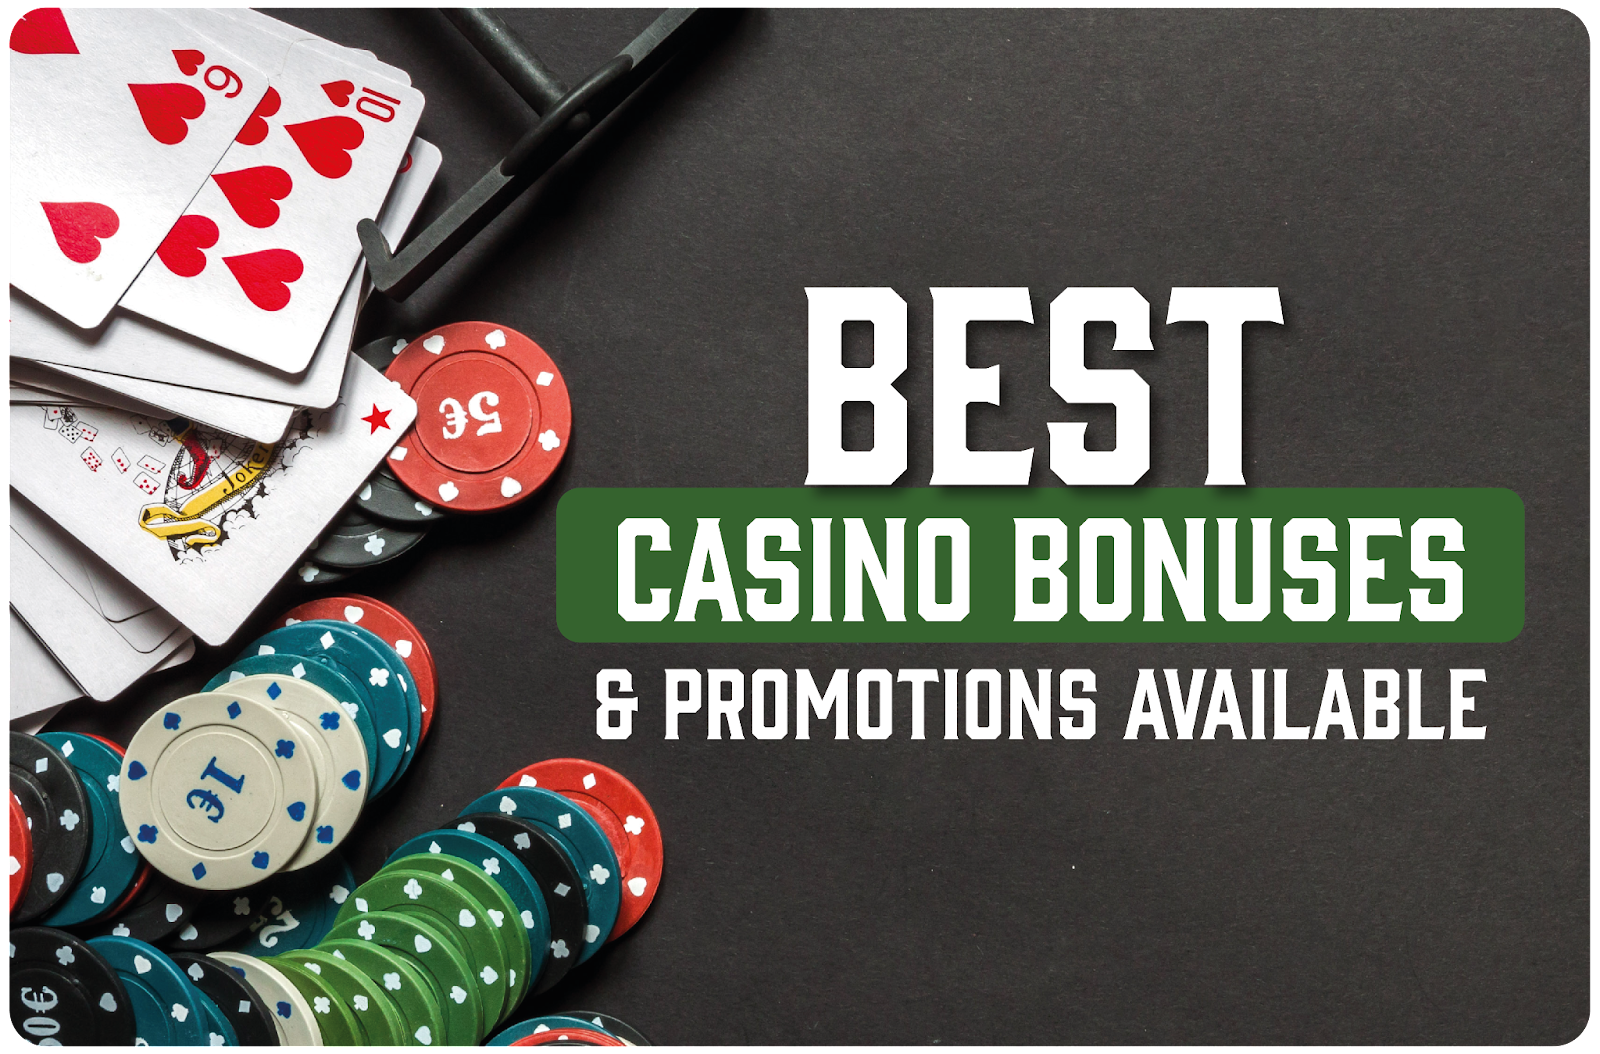 Casino Bonuses and Promotions: Are They Worth It?